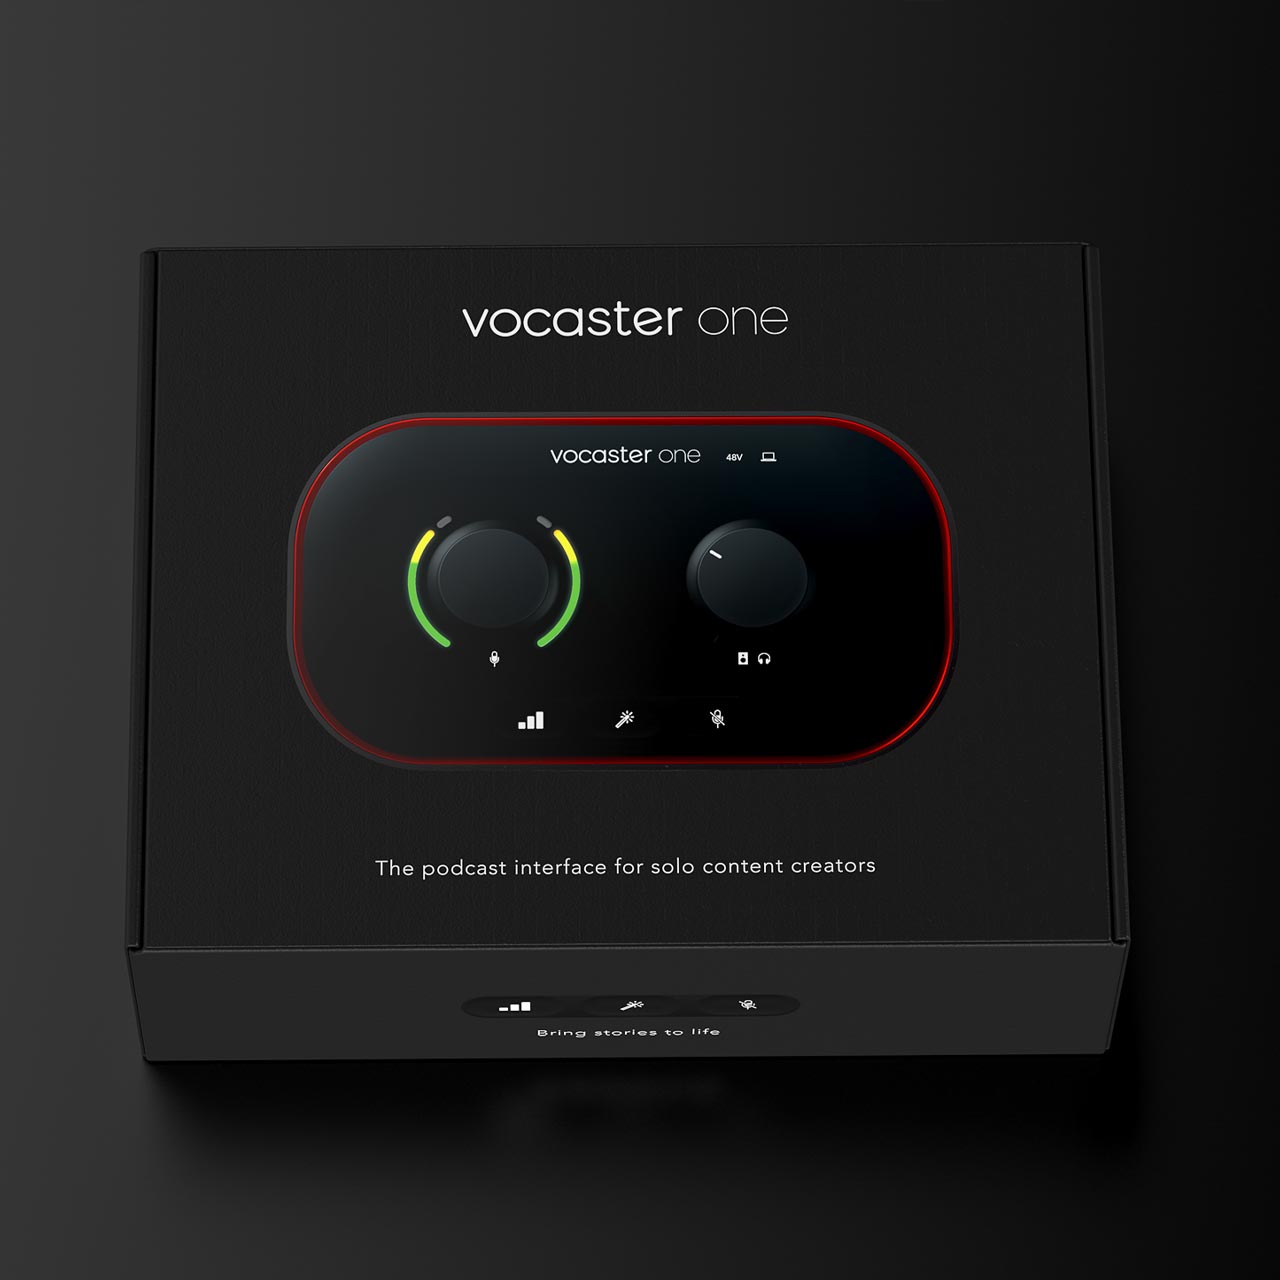 Vocaster One black box packaging sitting on black surface